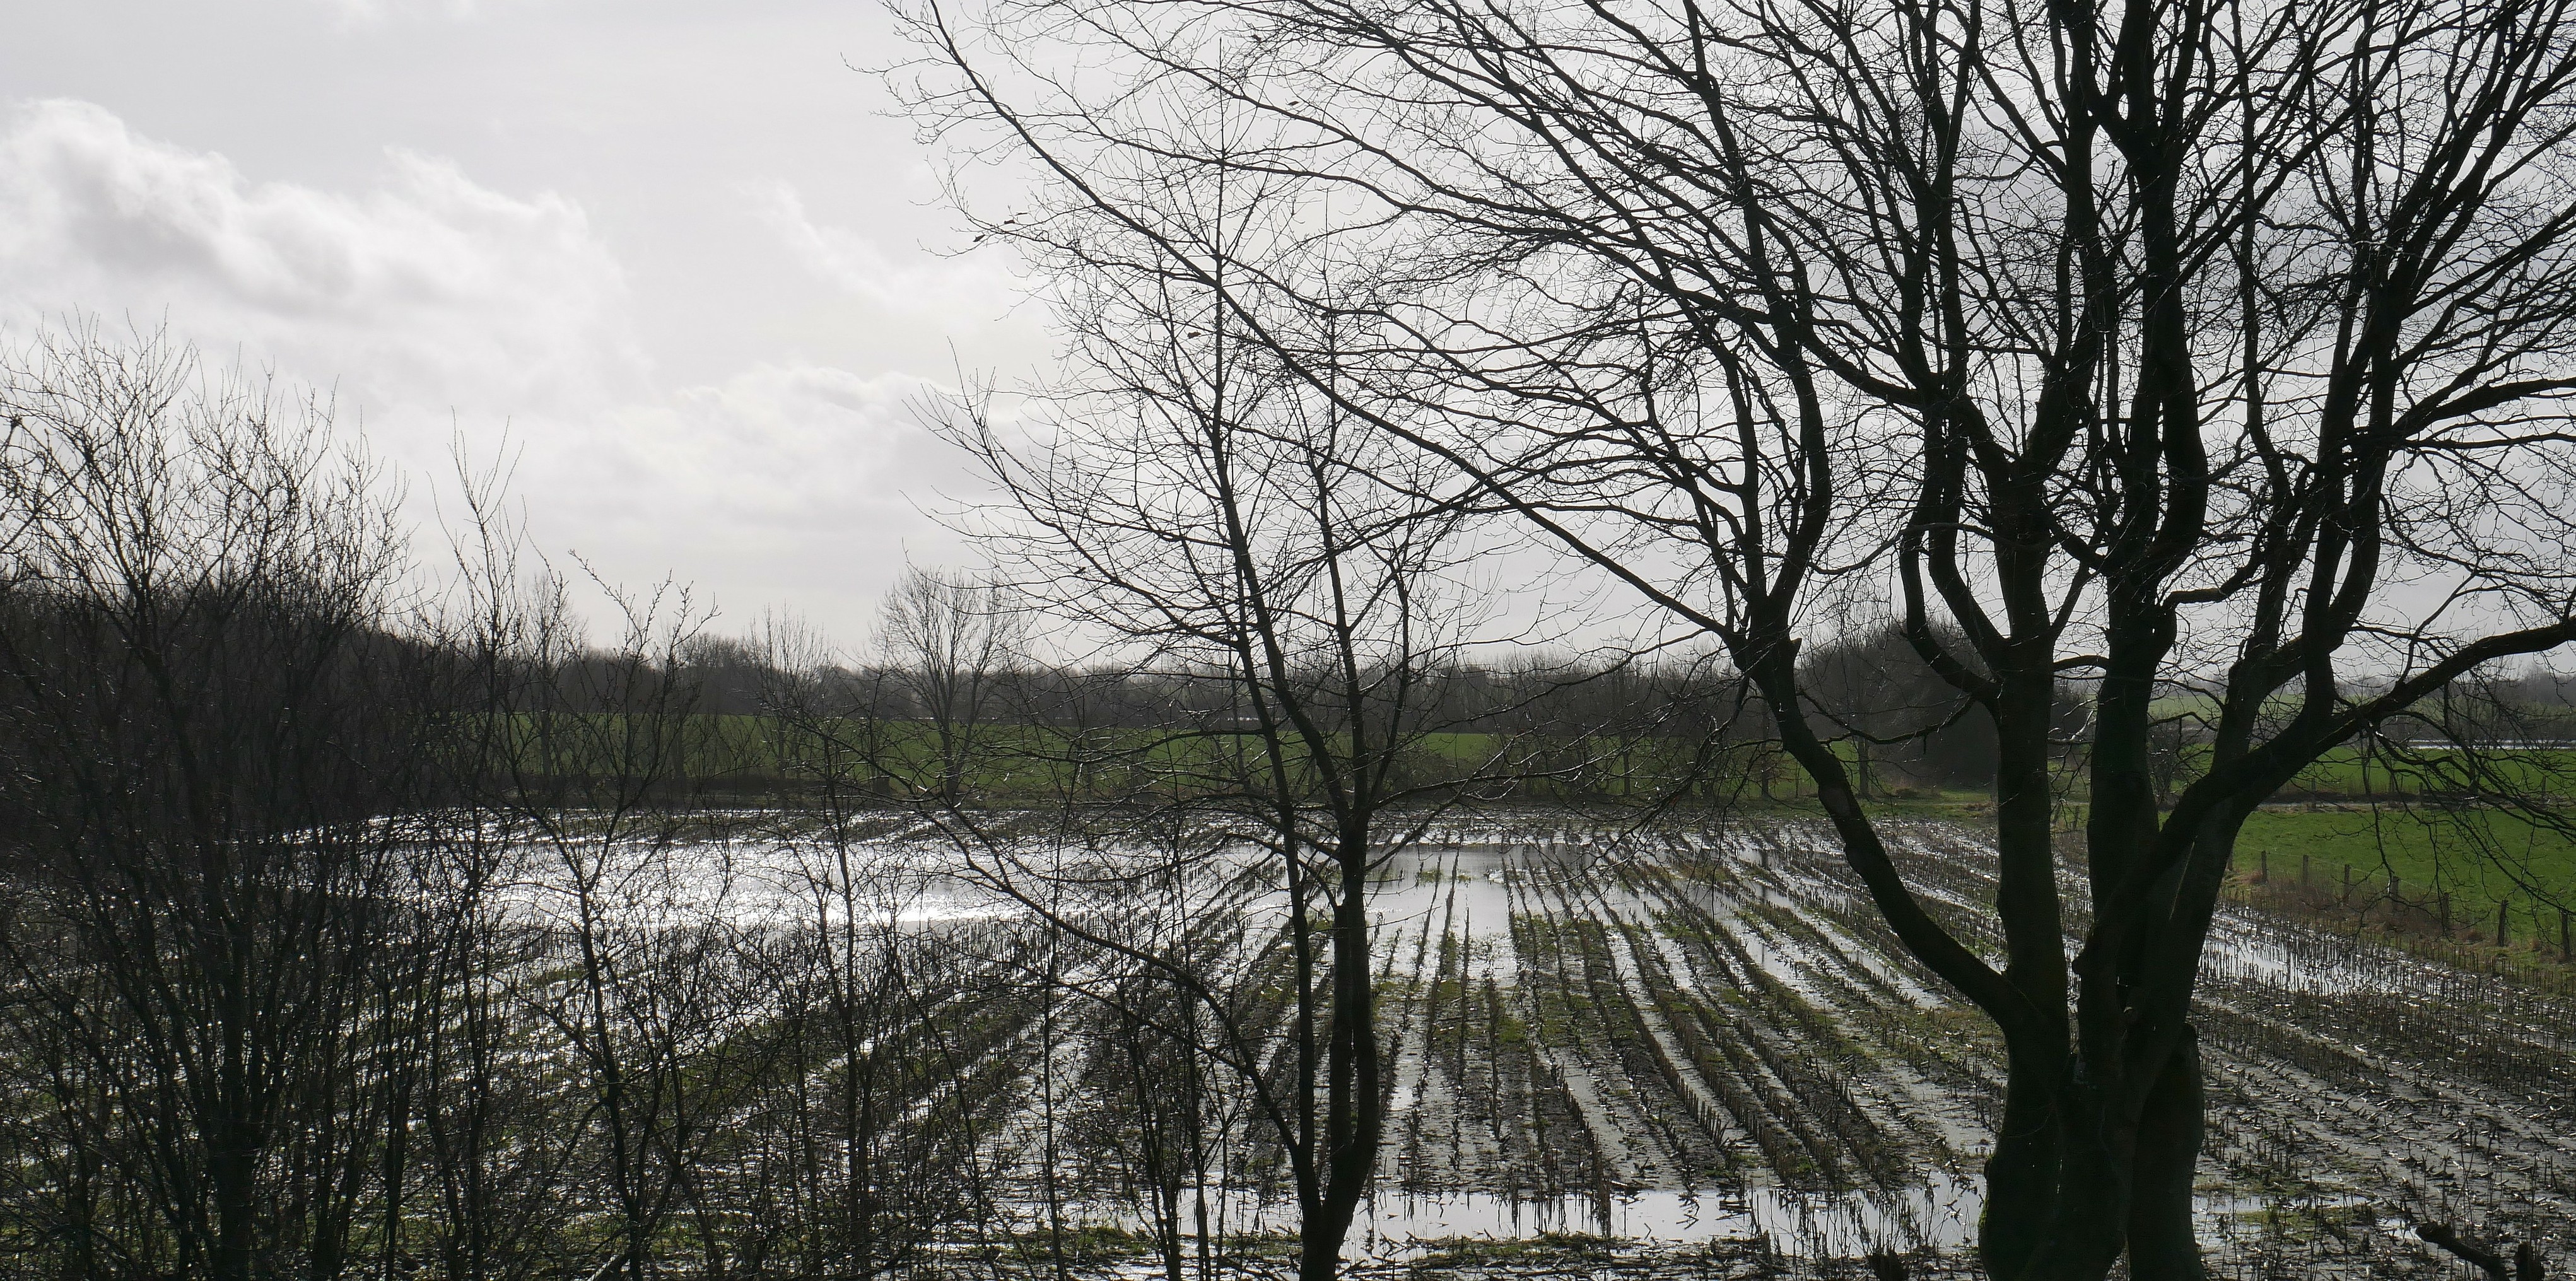 a field with stubs of maize mostly flooded